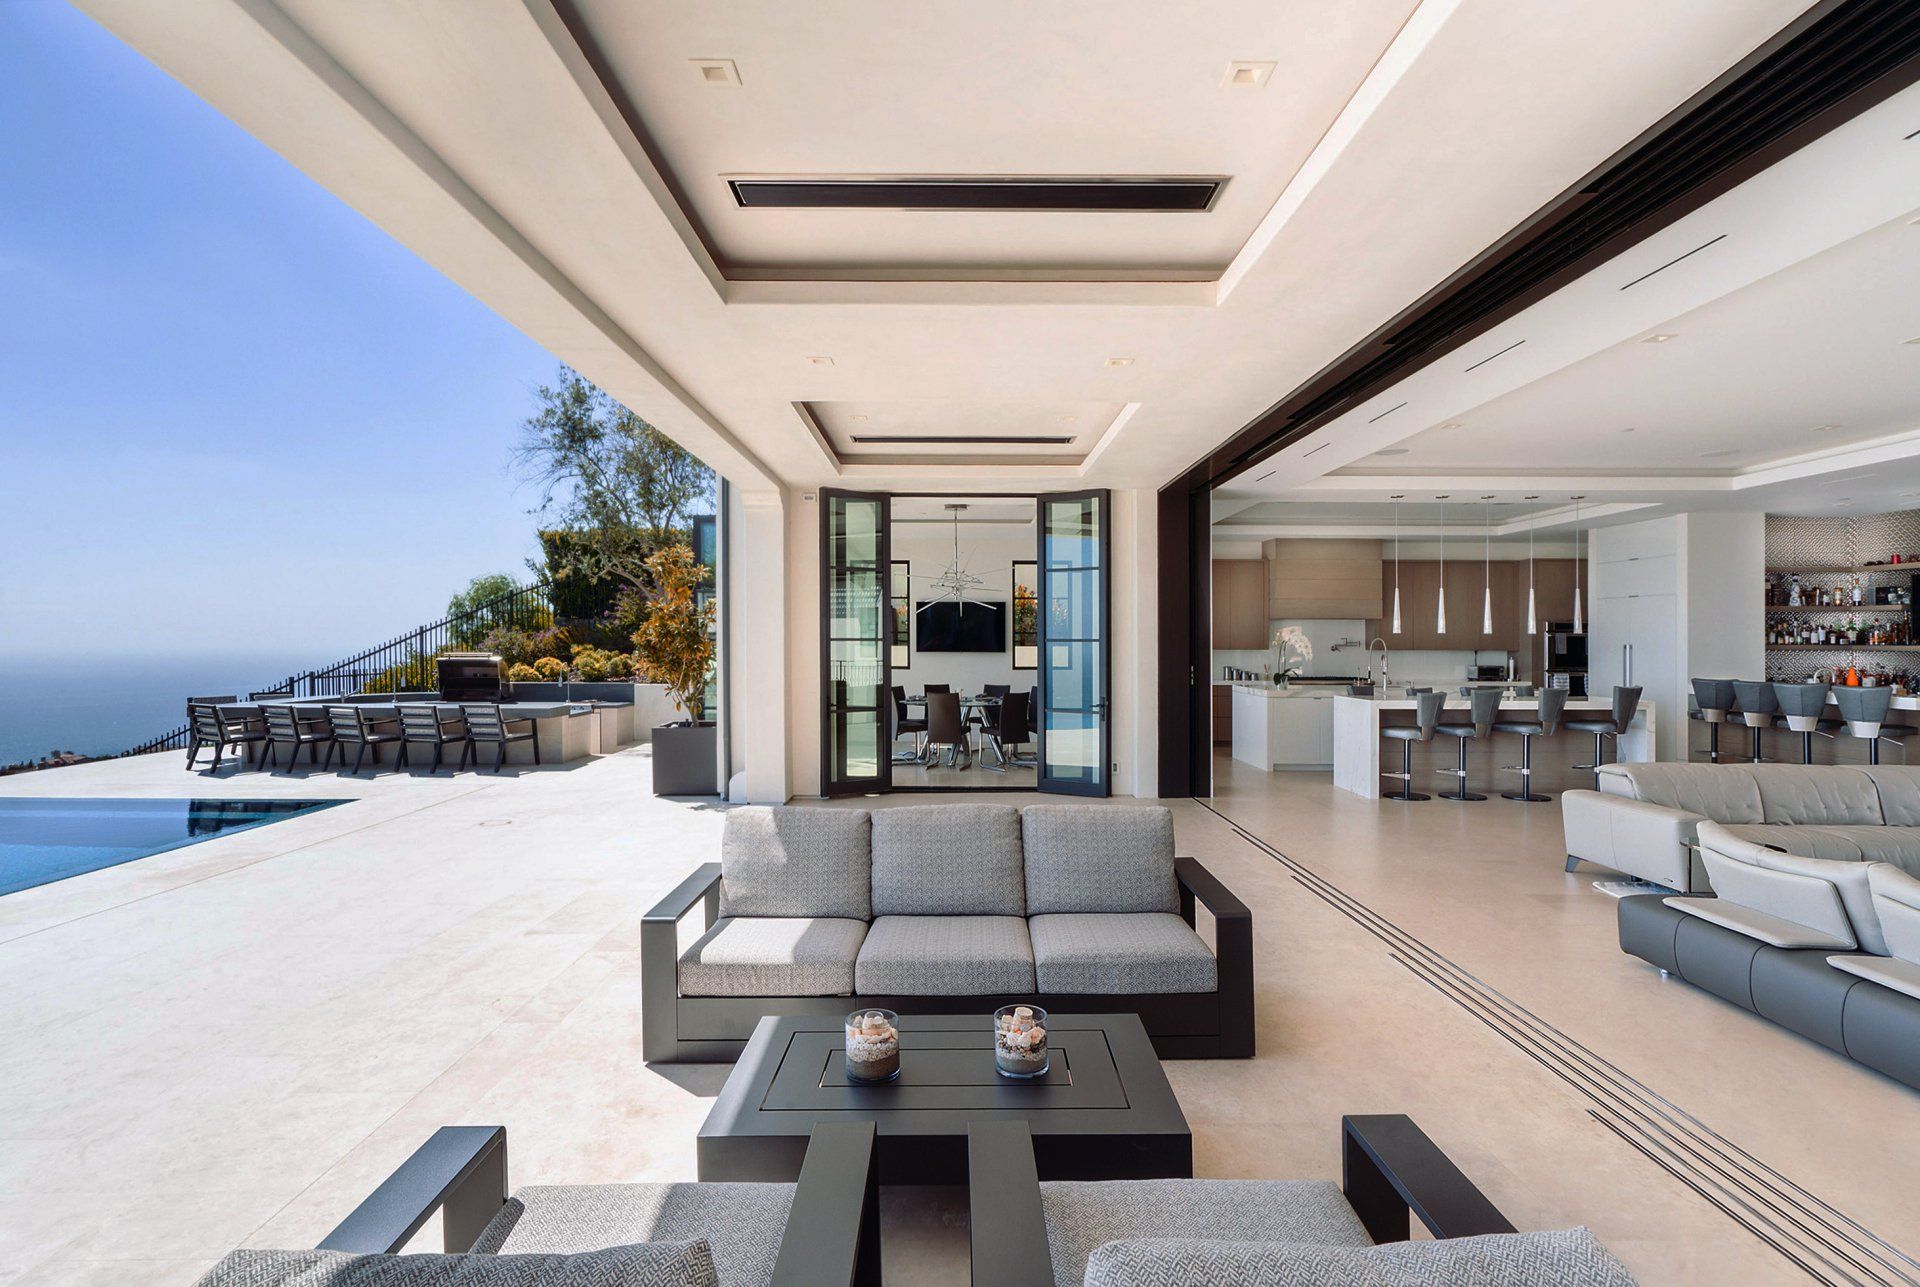 Indoor/outdoor space of Contemporary Spanish Revival house in Corona Del Mar, CA designed by Homer Oatman